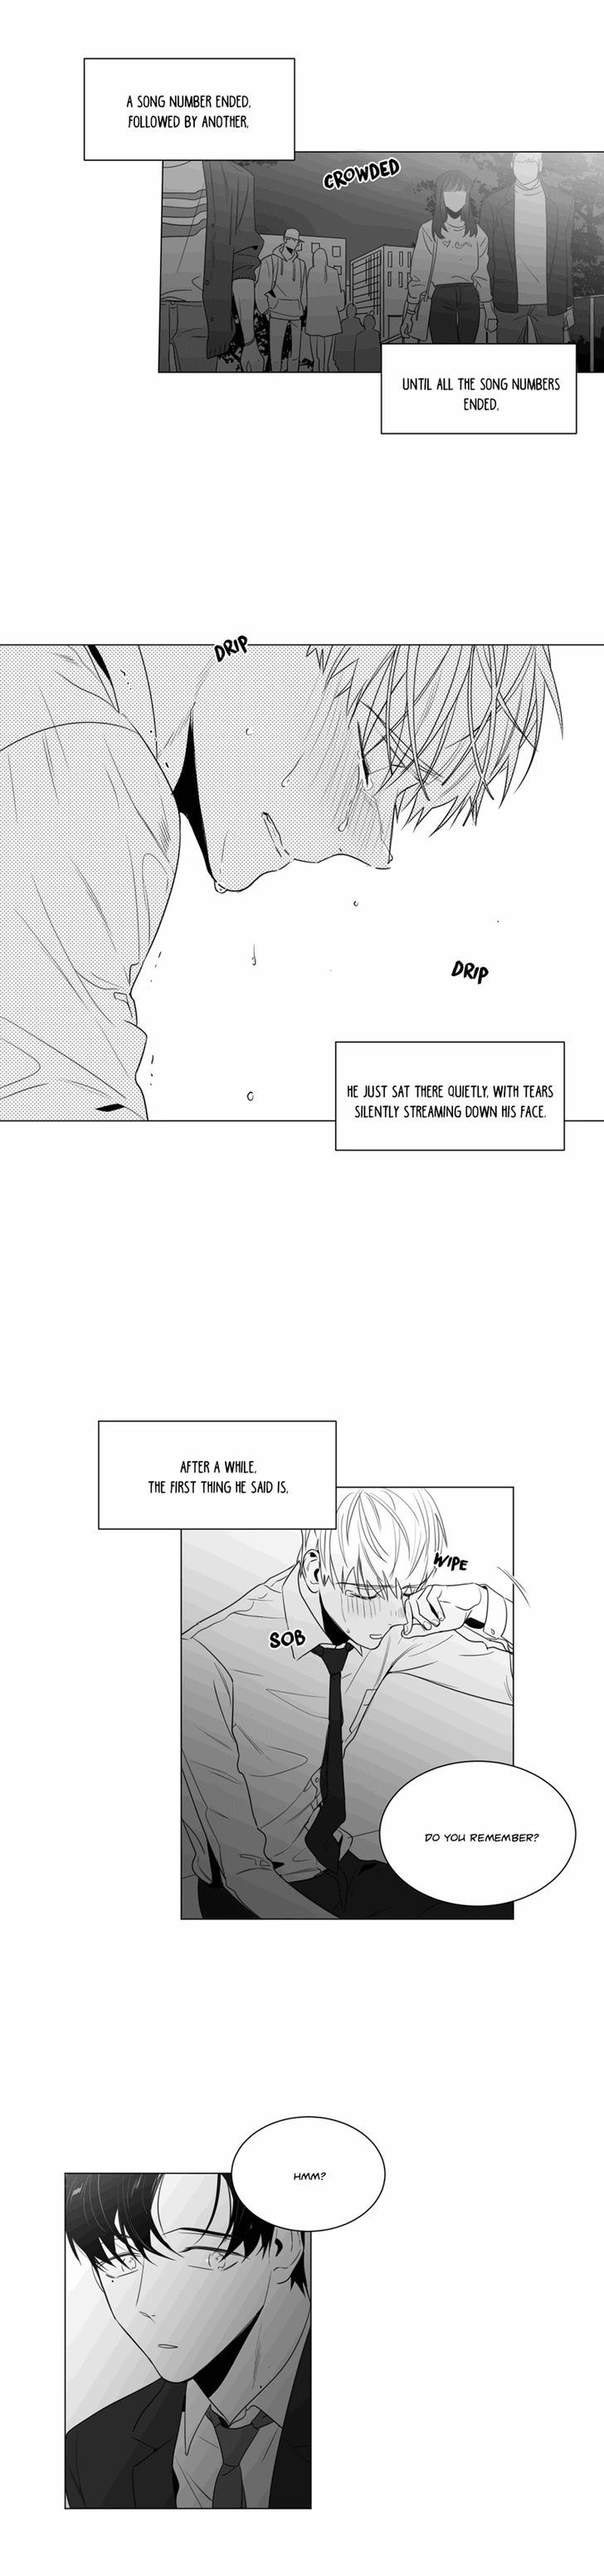 Lover Boy (Lezhin) Chapter 034 page 2